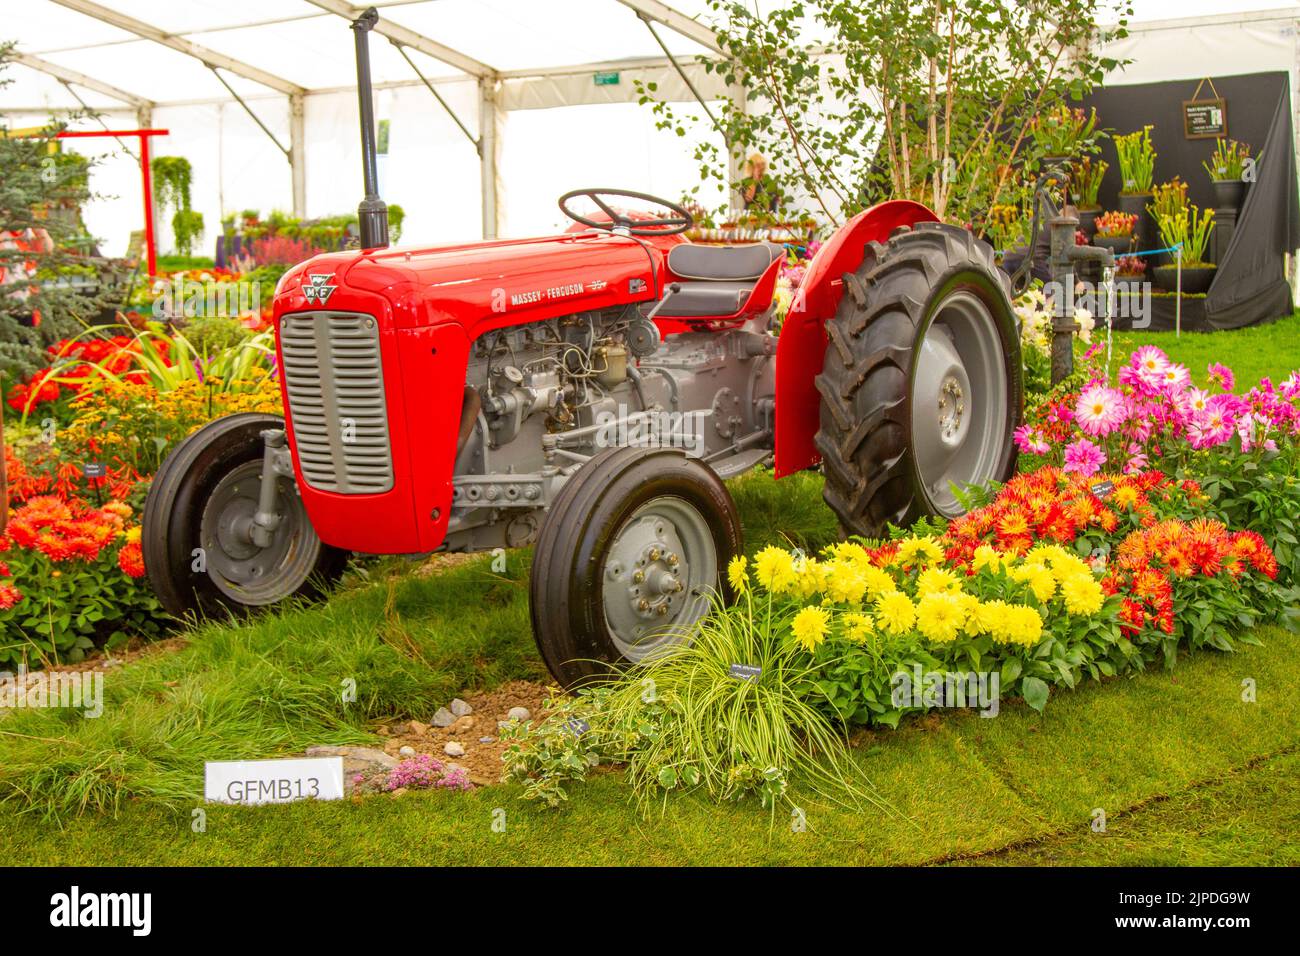 Southport Flower Show, Merseyside, UK. 18th Aug 2022:  James Comish restored 1964 Massey Ferguson 65 3.3 Litre 4-Cyl Diesel Tractor a Gold Medal Winning display at the largest independent flower show in England, which is expecting thousands of visitors over the four-day event as it opened today after a two-year Covid closure.  Credit: MediaWorld Images/Alamy Live News Stock Photo